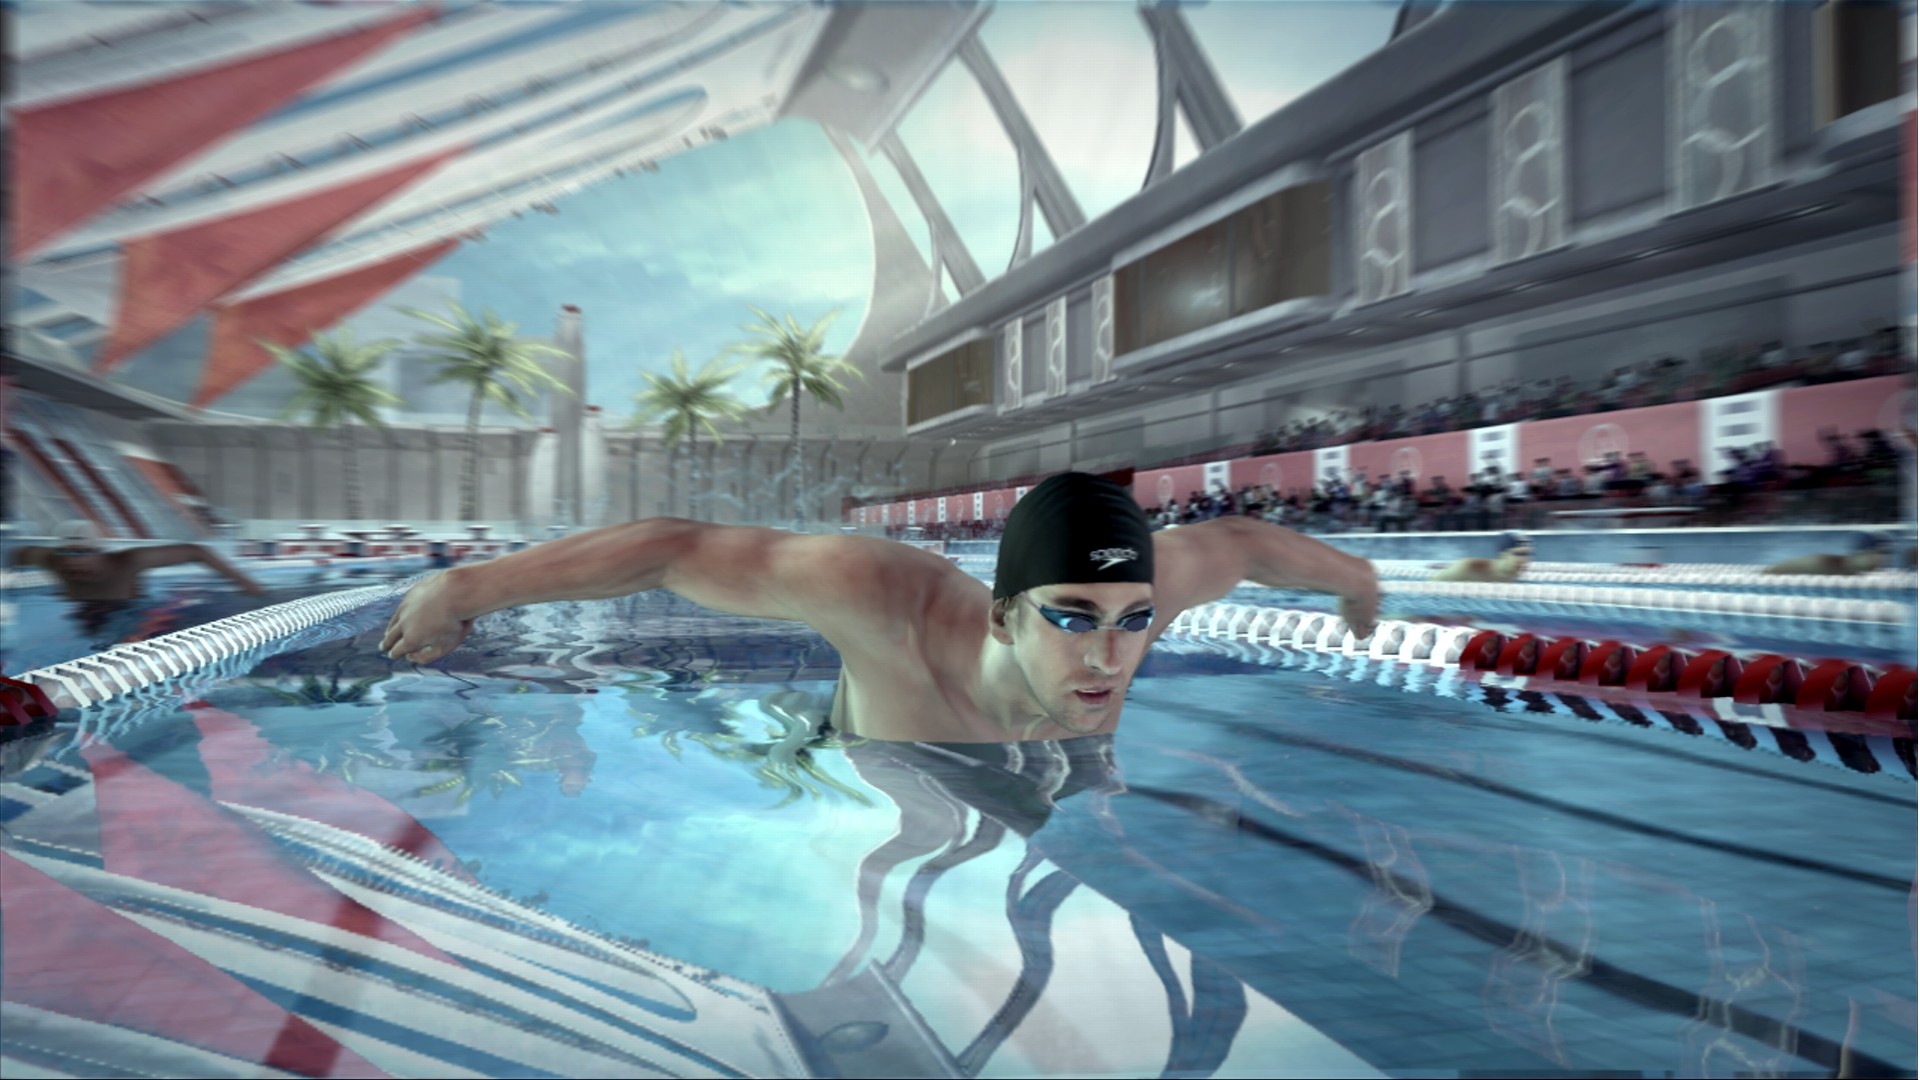 1920x1080 Legendary Swimmer Michael Phelps Gets His Own Video Game